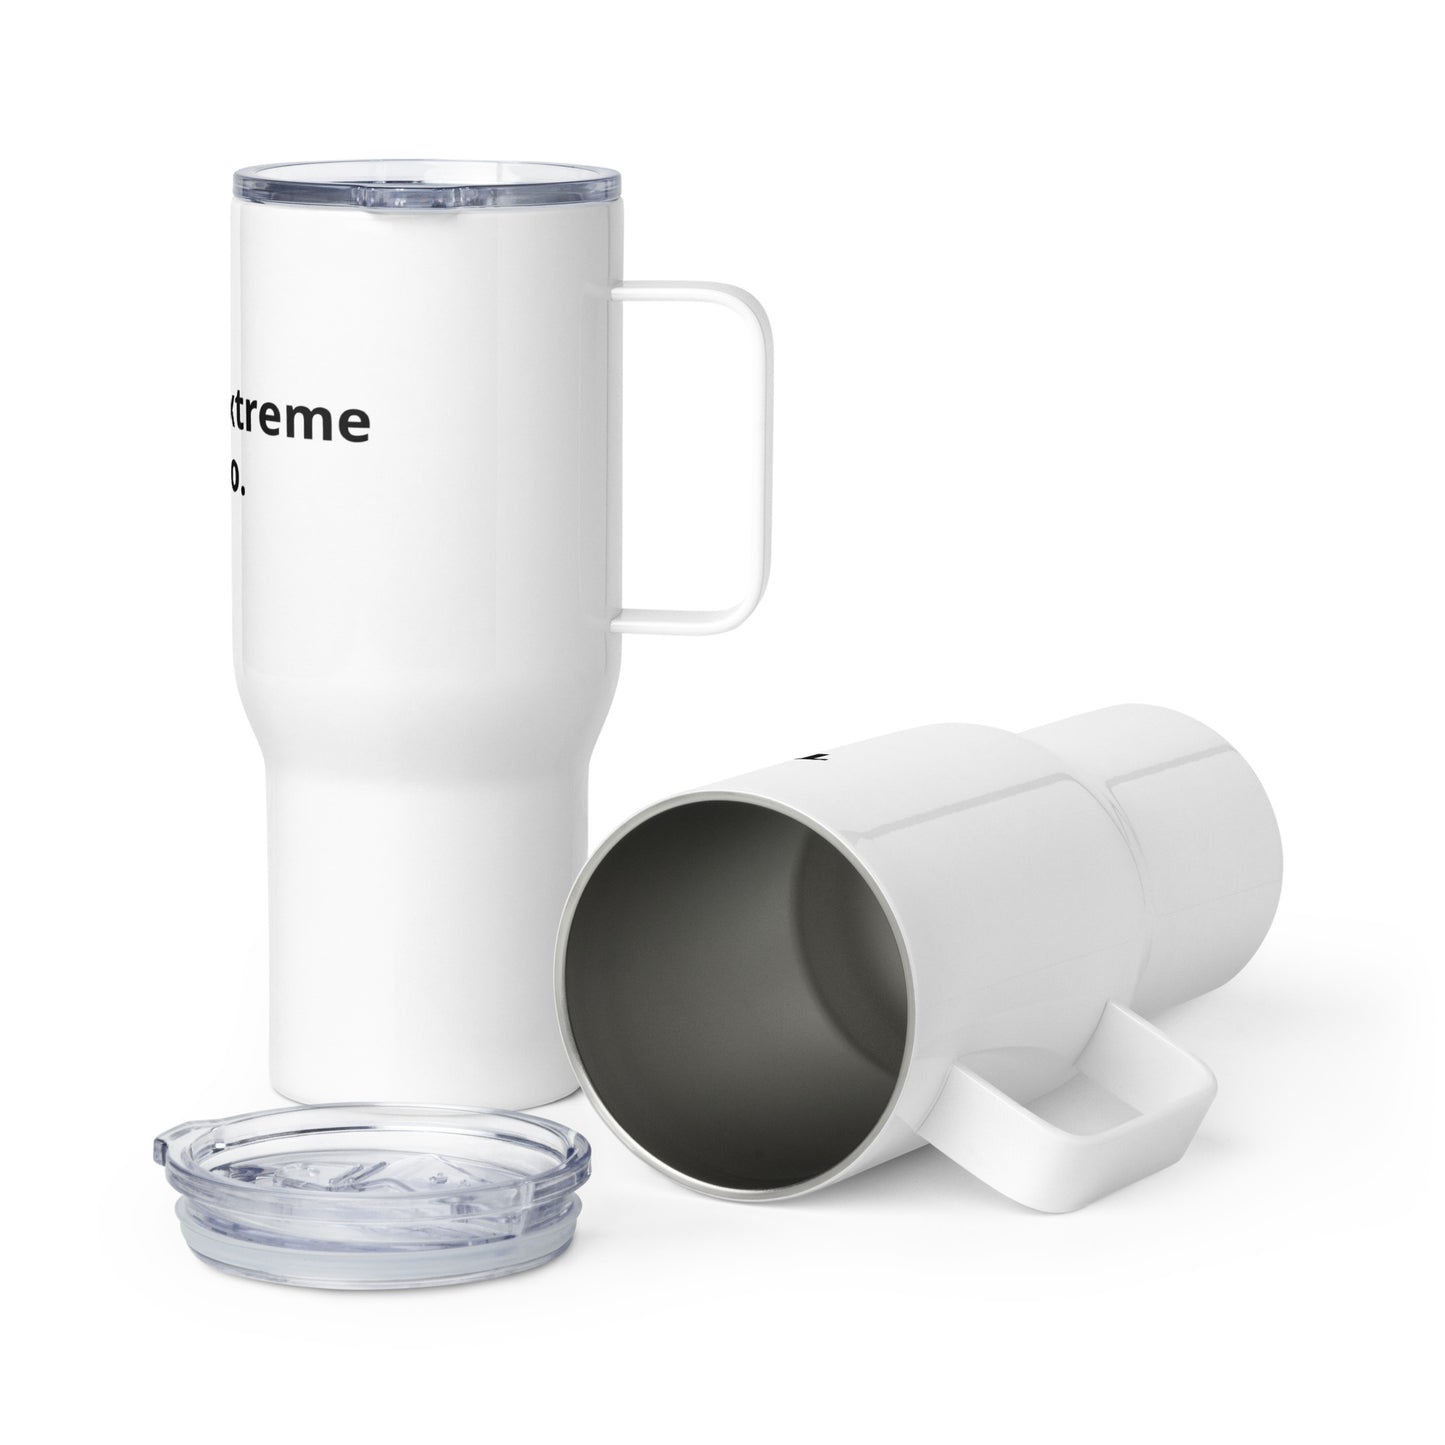 The Mean Extreme Expedition Travel Mug